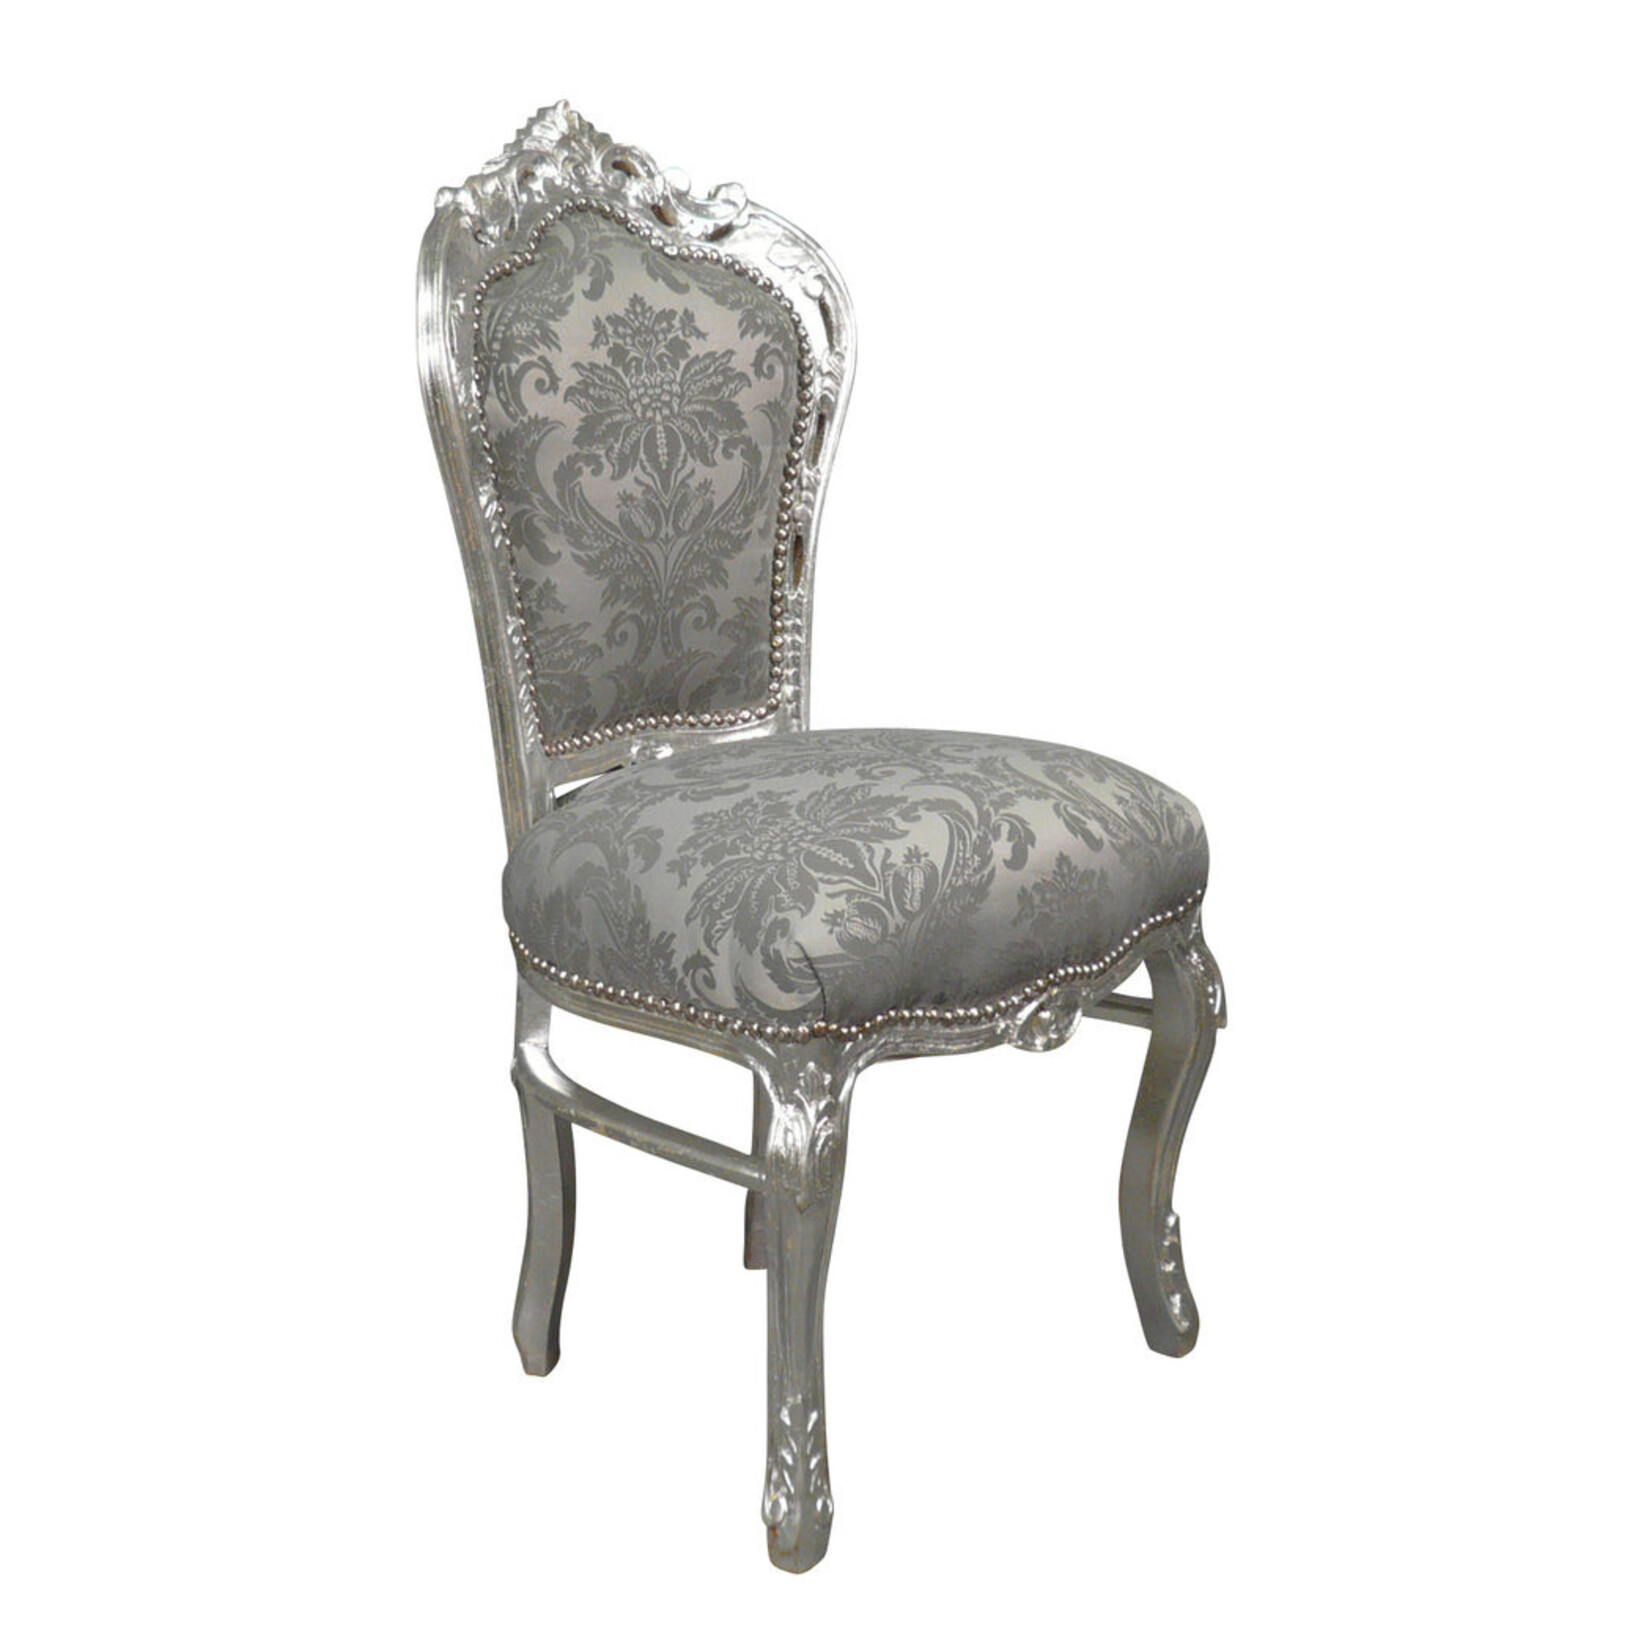 LC Baroque dining room chair gray flower